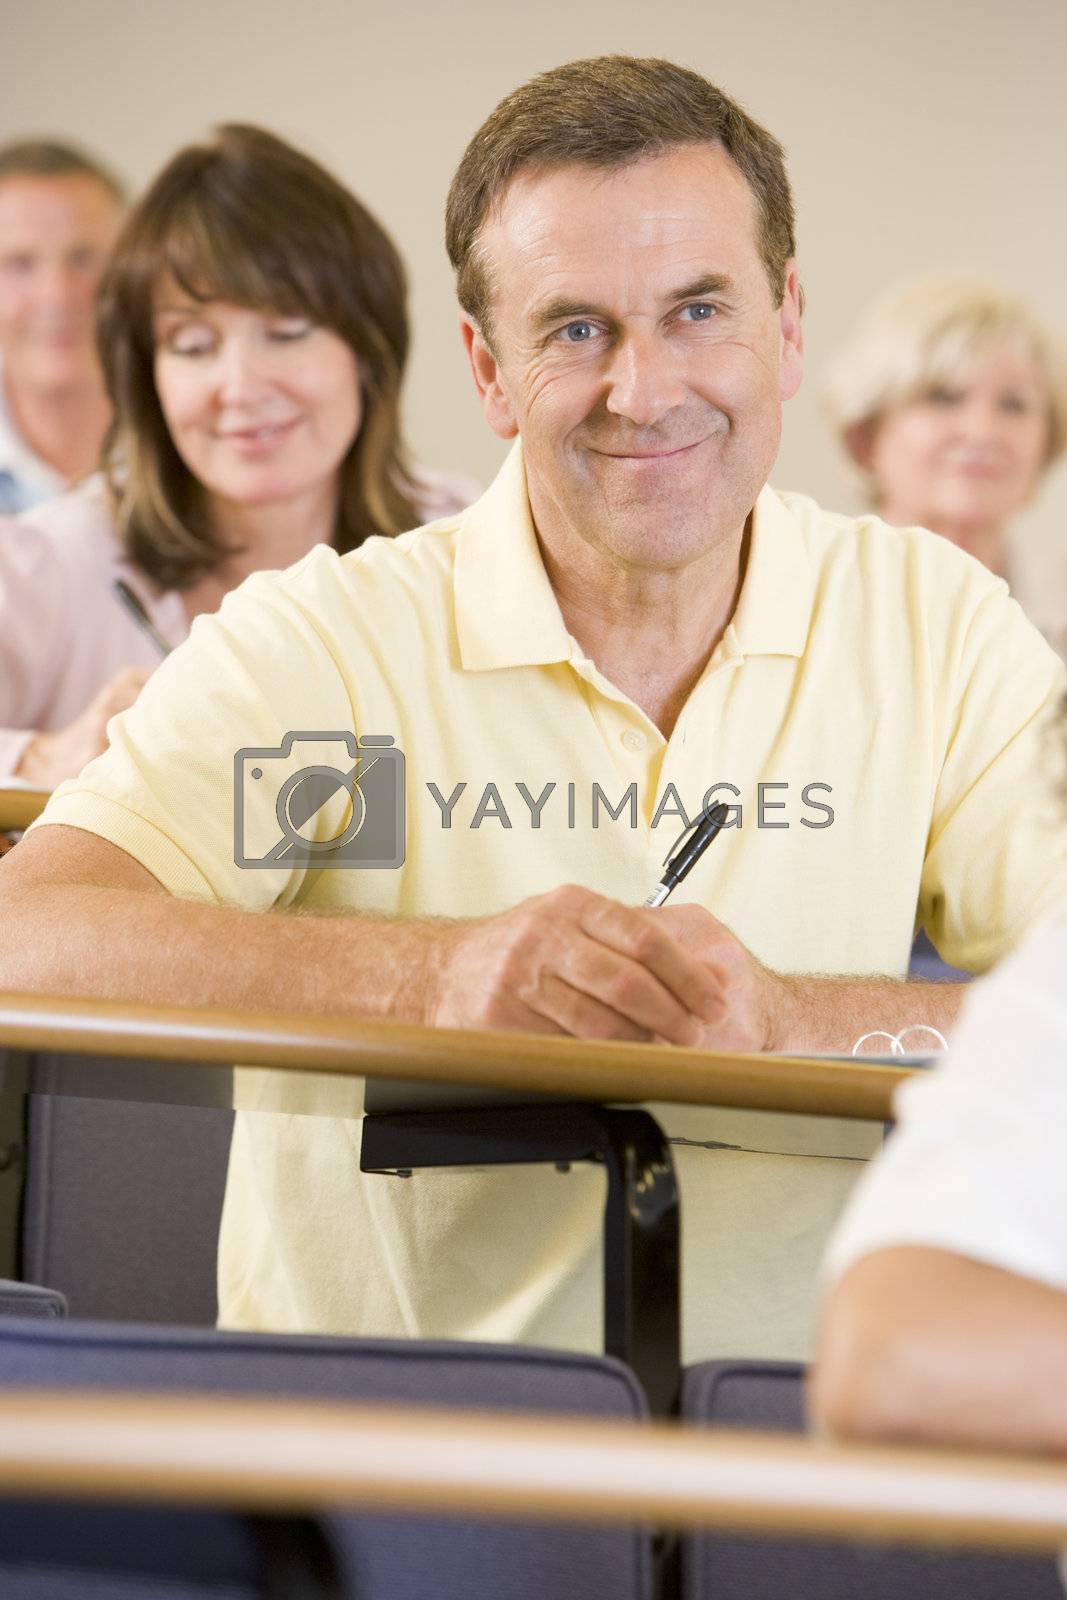 Royalty free image of Man sitting in adult classroom with students in background (selective focus) by MonkeyBusiness